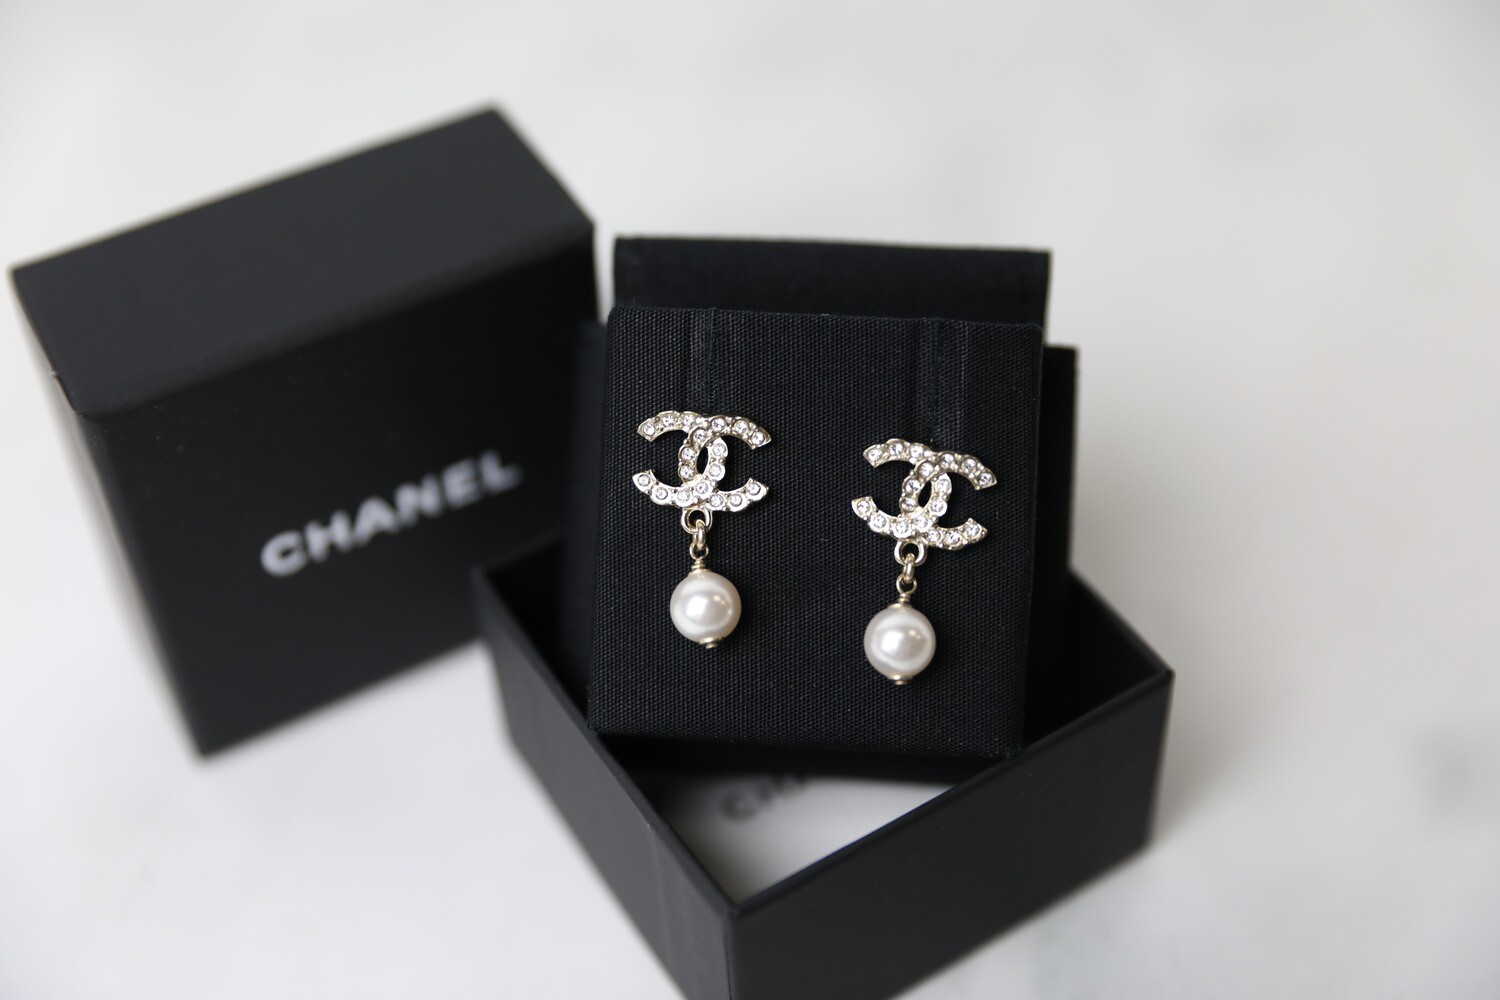 Chanel Earrings, Crystal CC with Pearl Drop, New in Box WA001